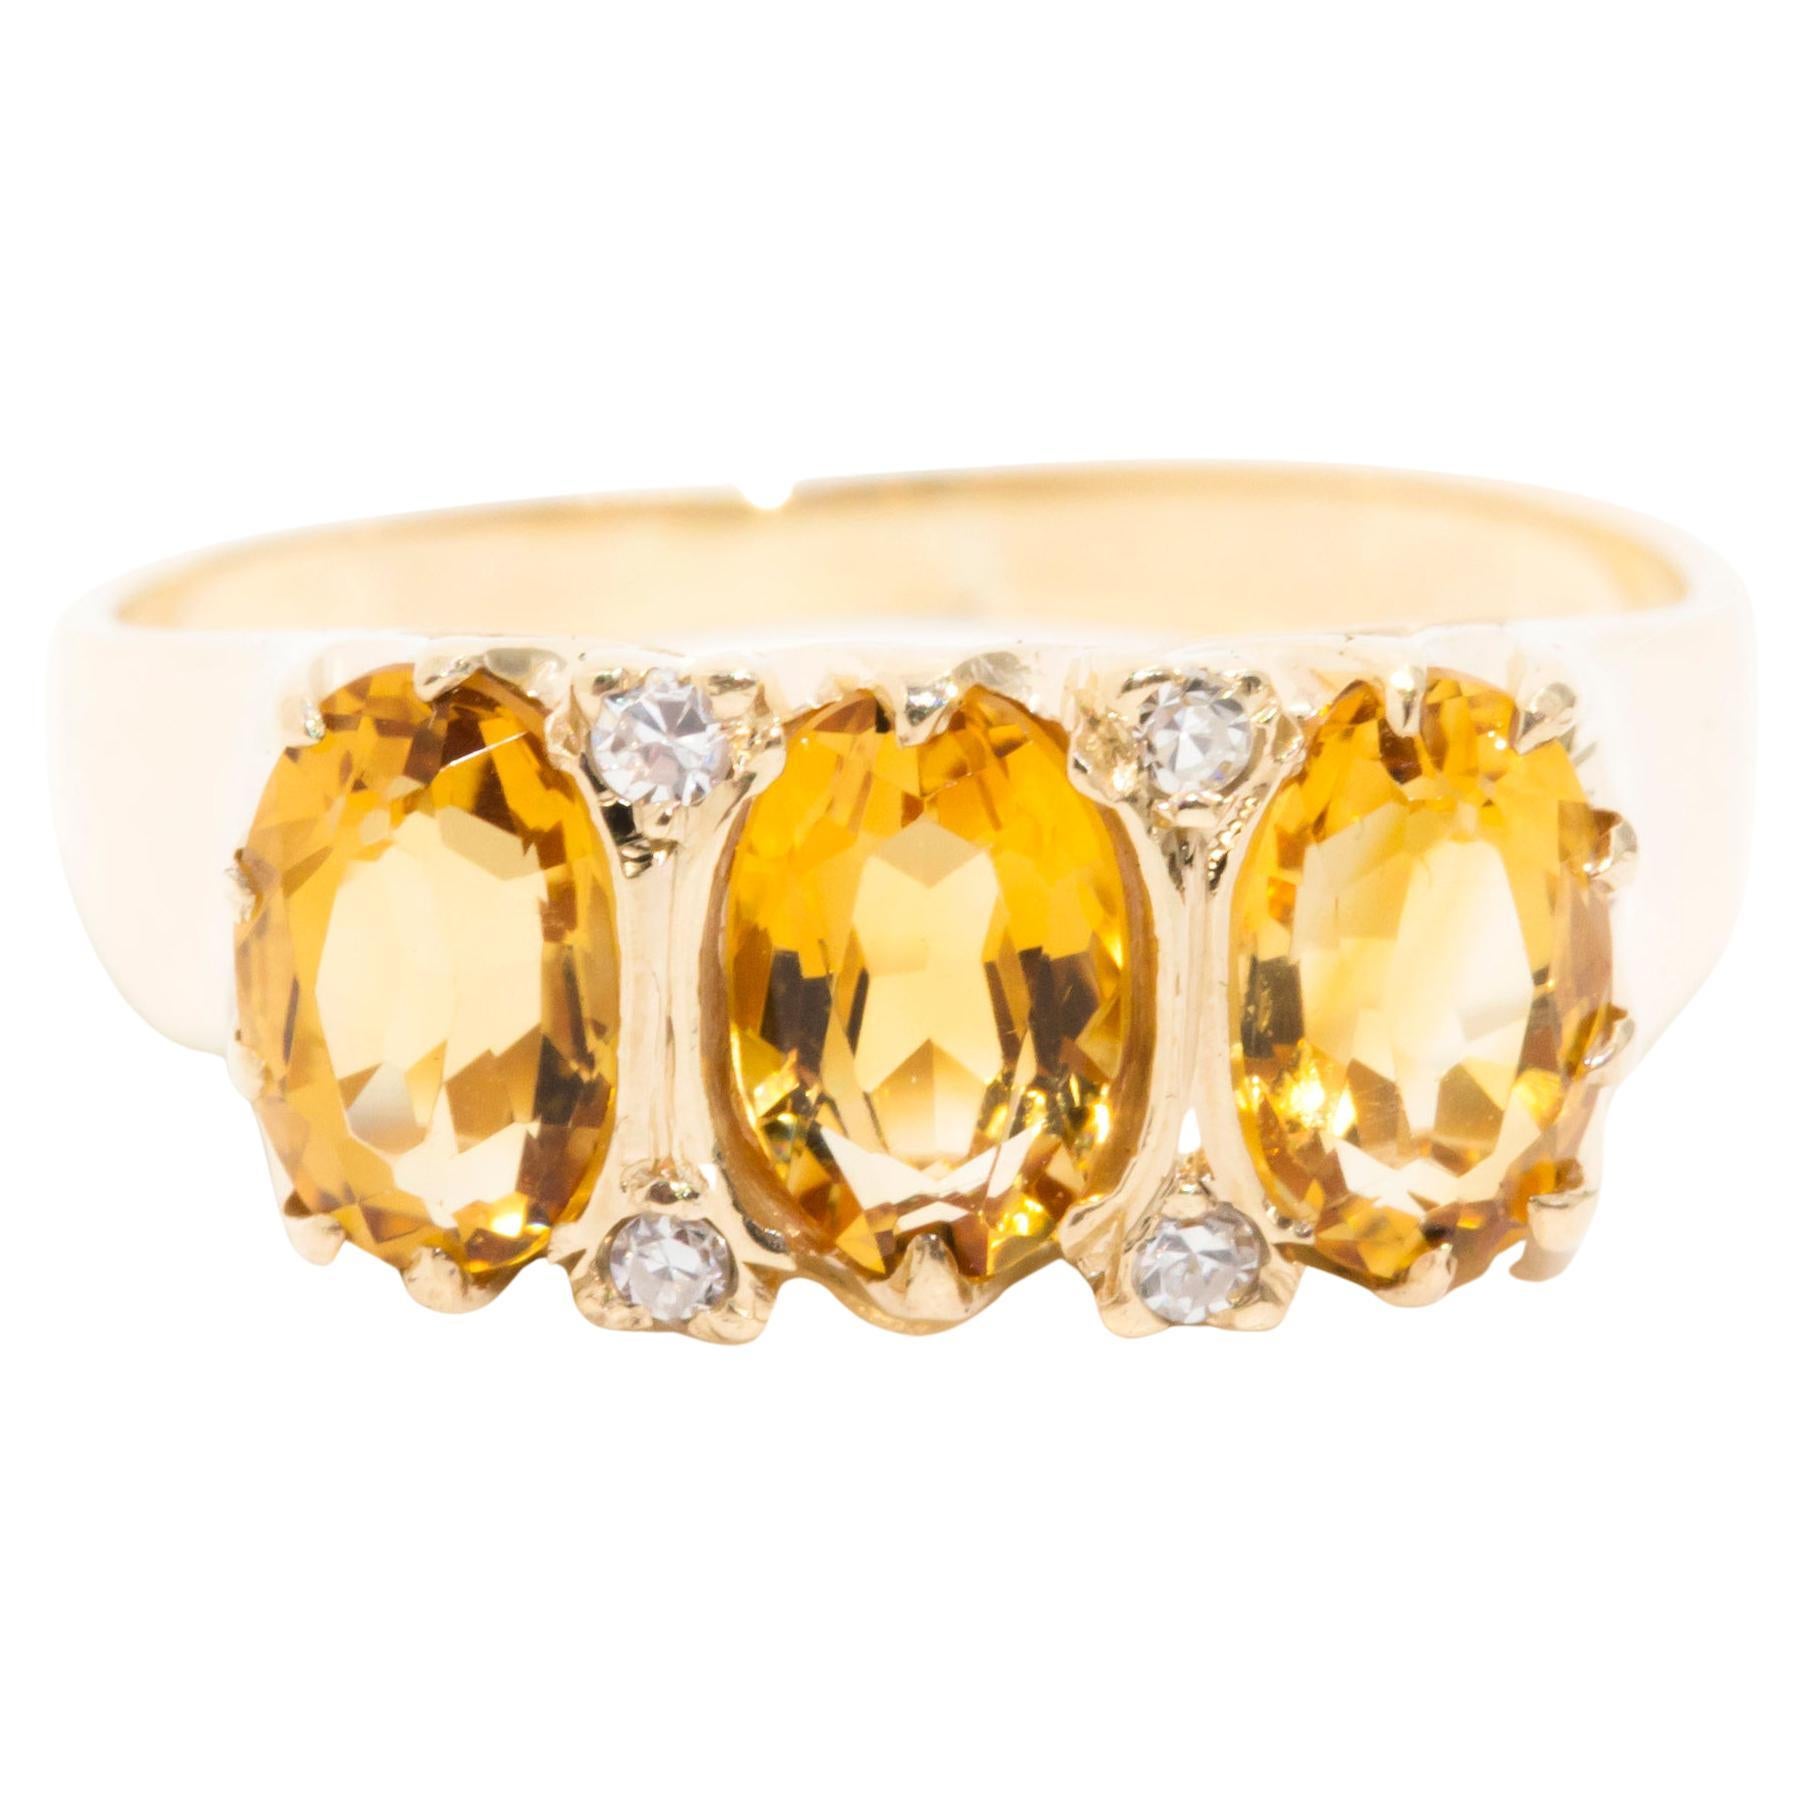 Oval Yellow Citrine and Diamond Vintage Three Stone Ring in 9 Carat Yellow Gold